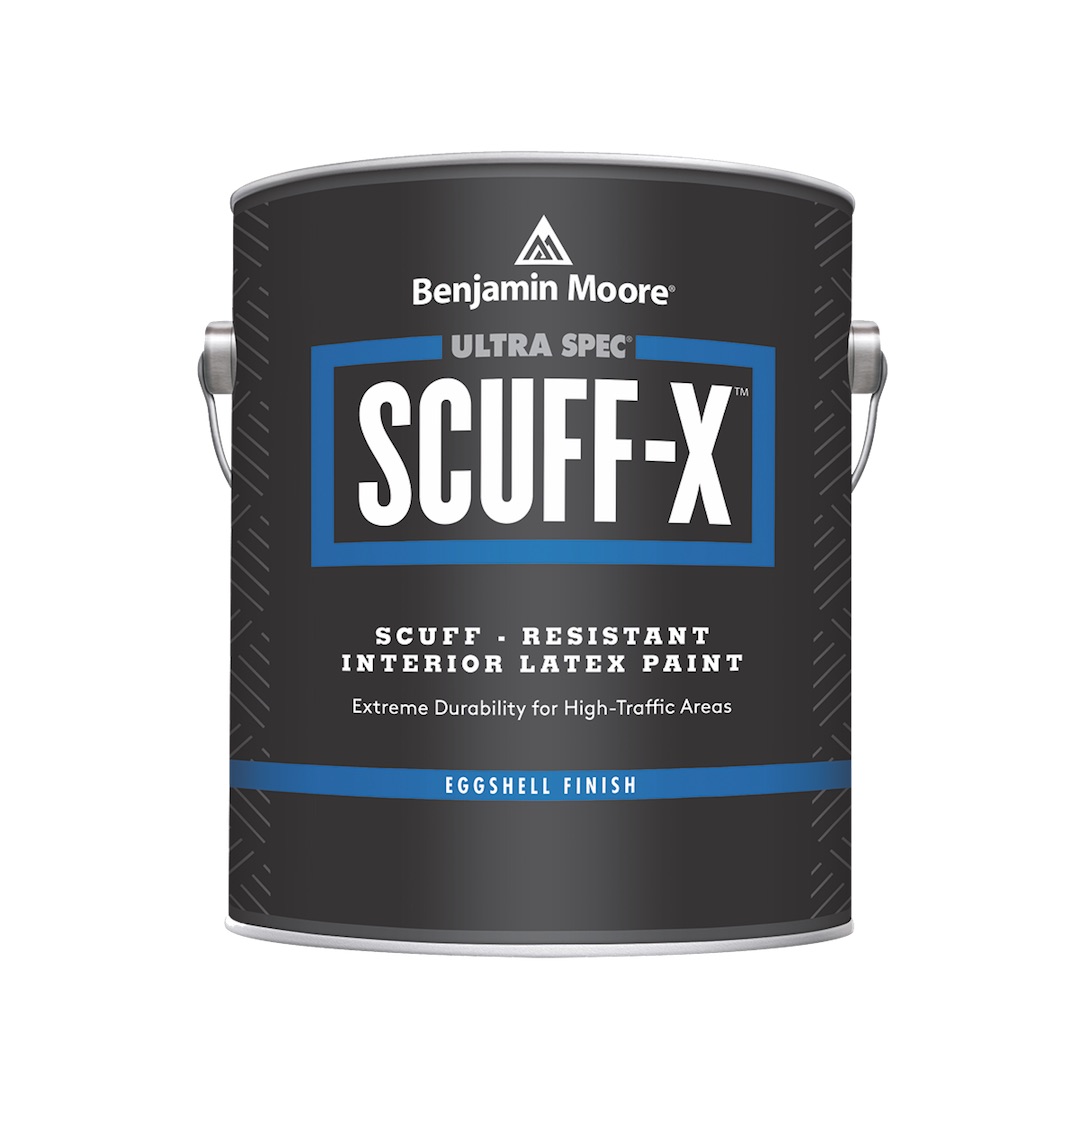 ultra spec Scuff-x paint from benjamin moore